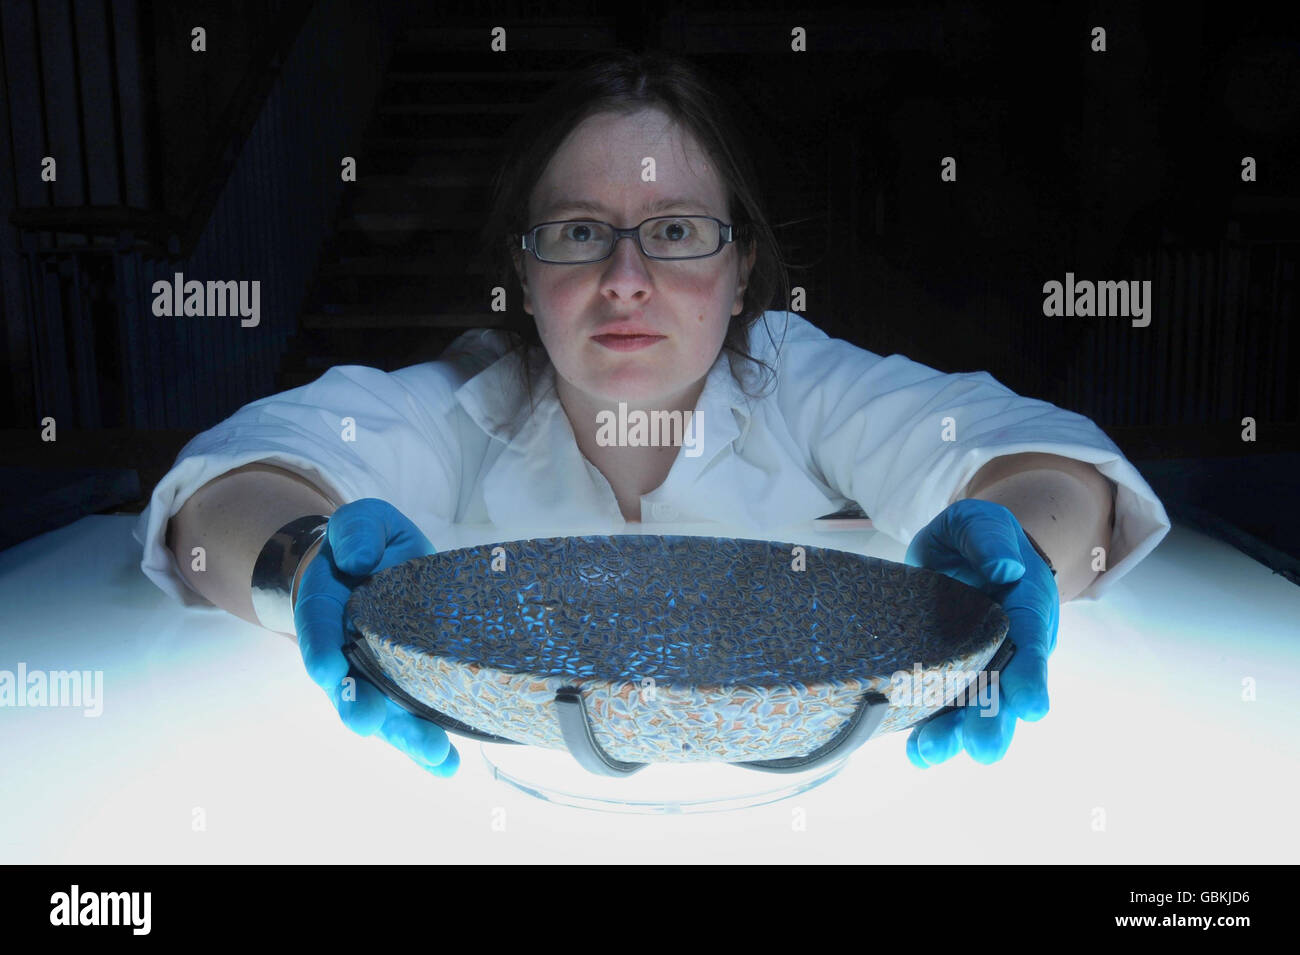 Archaeology Conservator at the Museum of London, Liz Goodman, with an intricate and rare Roman millefiori dish unearthed from the grave of a wealthy Londoner. It is thought to be the first find of its kind in the western Roman empire. Stock Photo